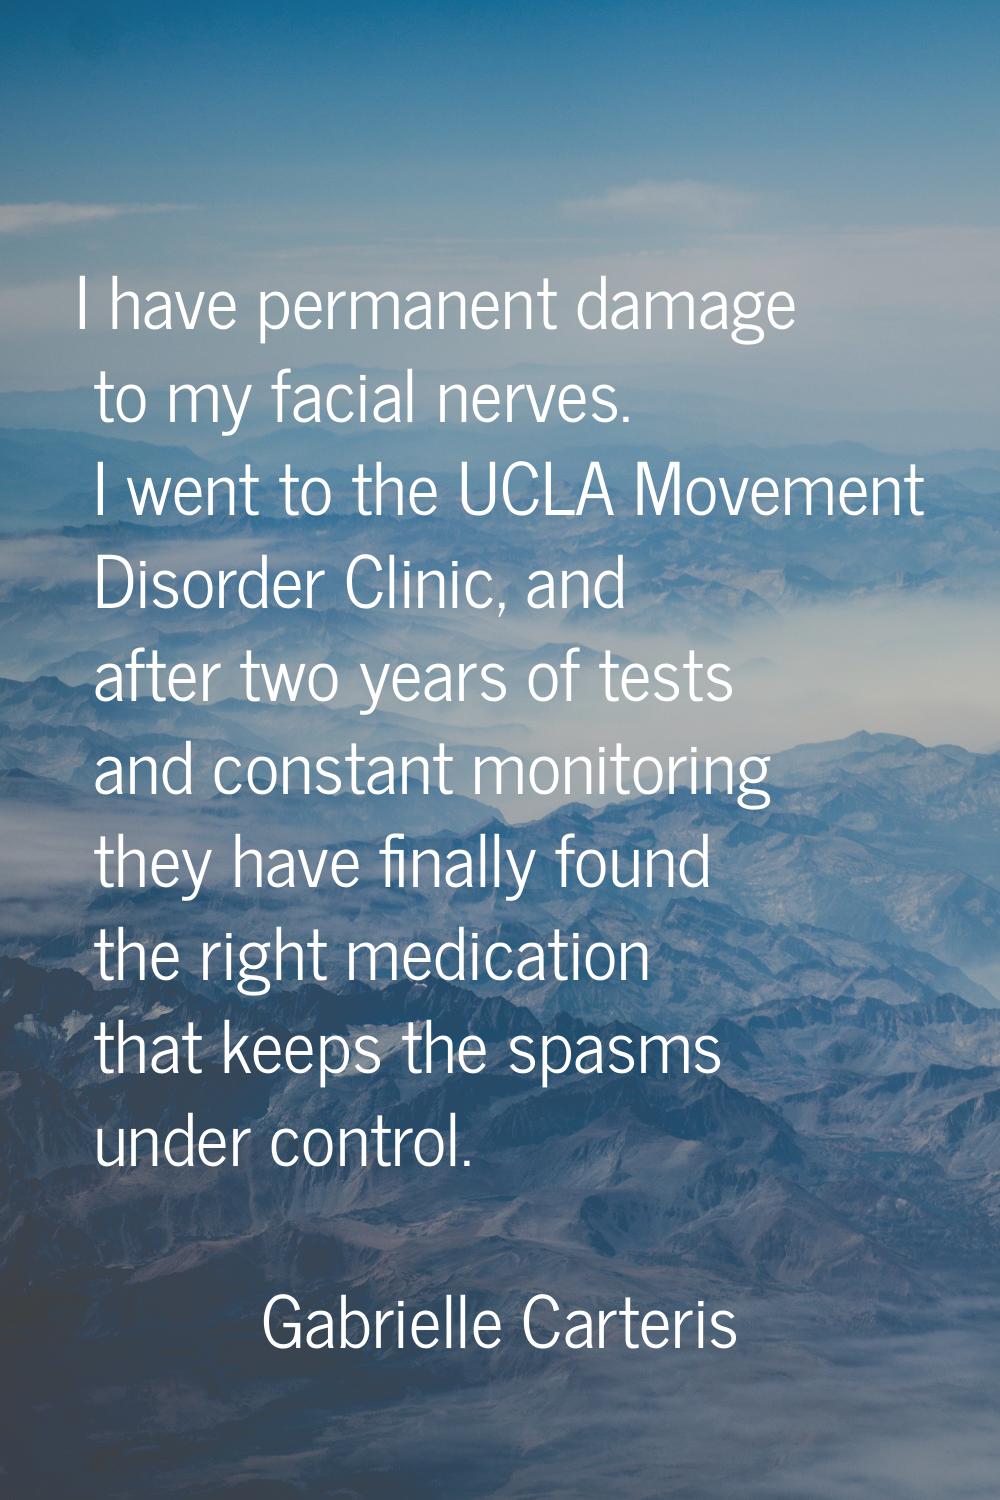 I have permanent damage to my facial nerves. I went to the UCLA Movement Disorder Clinic, and after